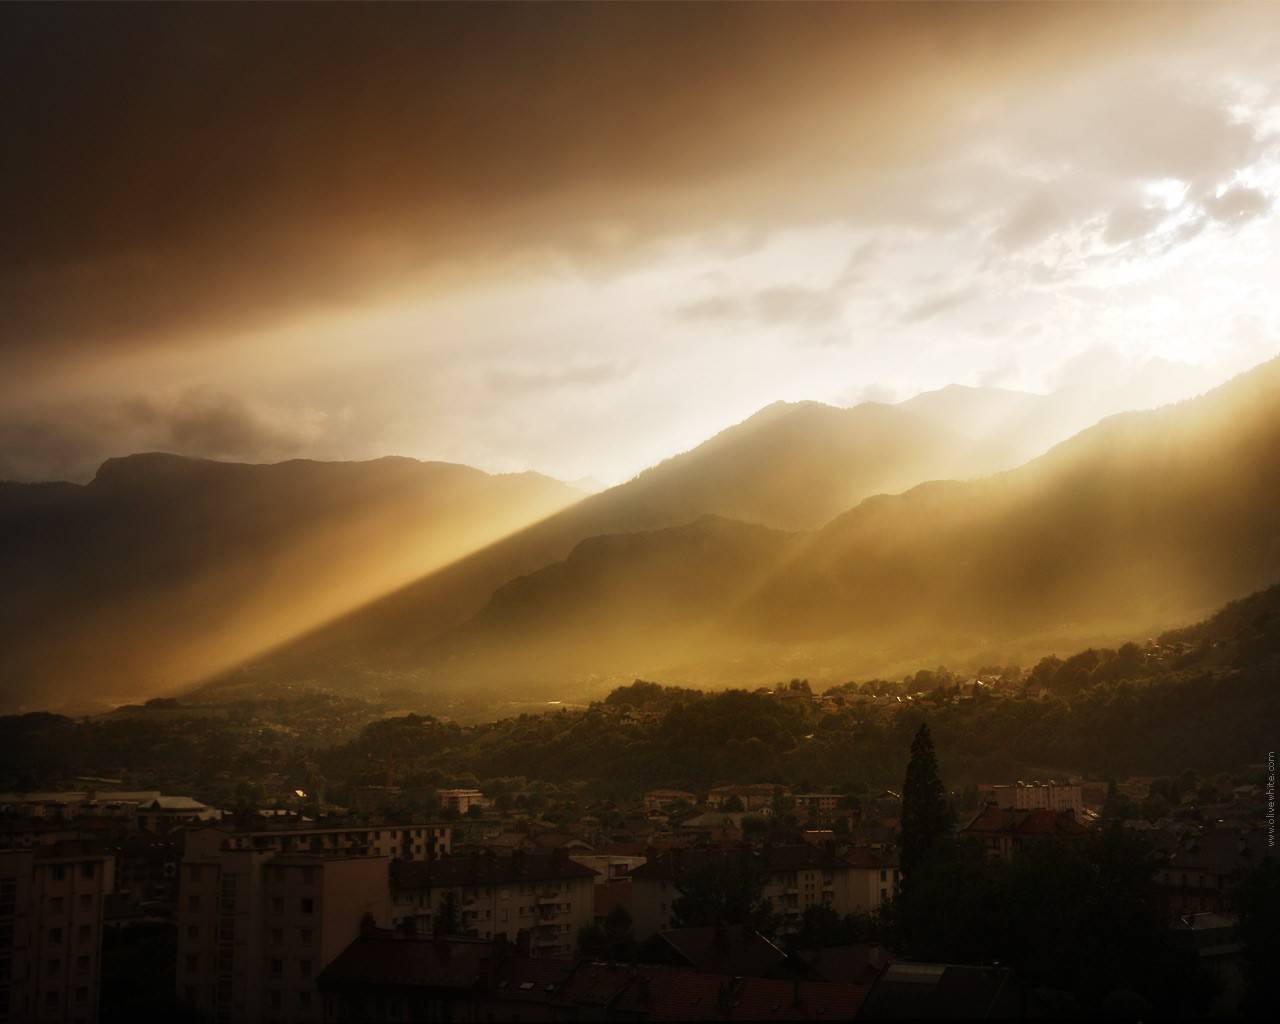 light-mountains-clouds-landscapes-autumn-cityscapes-france-sepia-wallpaper.jpg